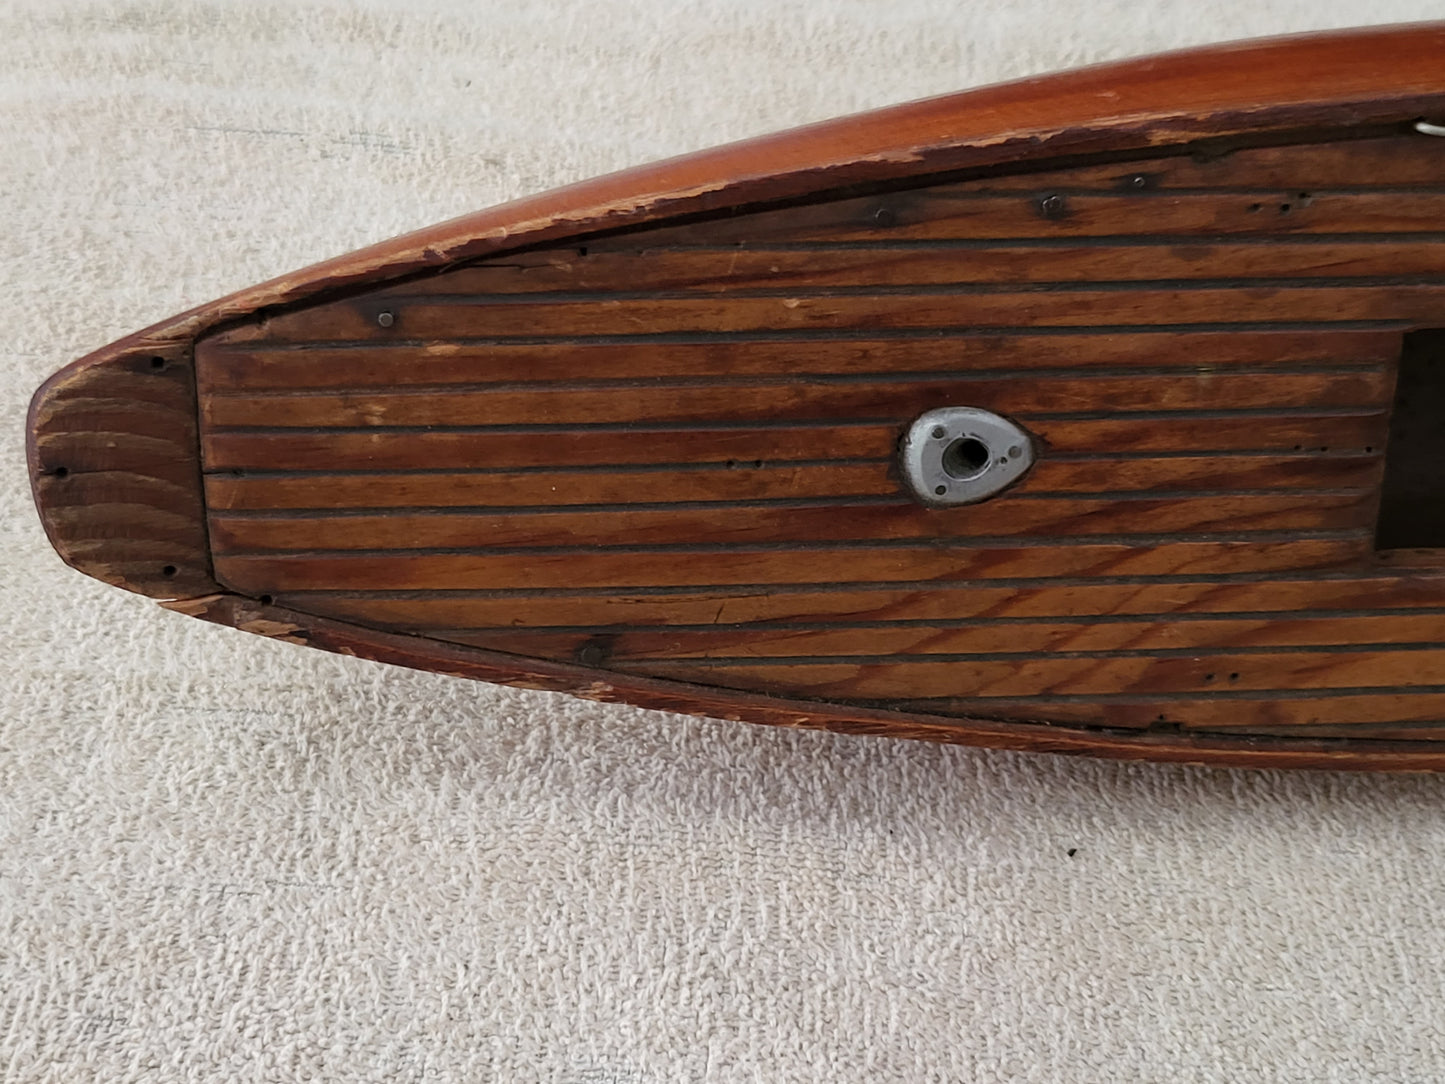 Vintage / Antique 25" Wooden Toy Pond Yacht Sailboat Hull - Weighted at Bottom